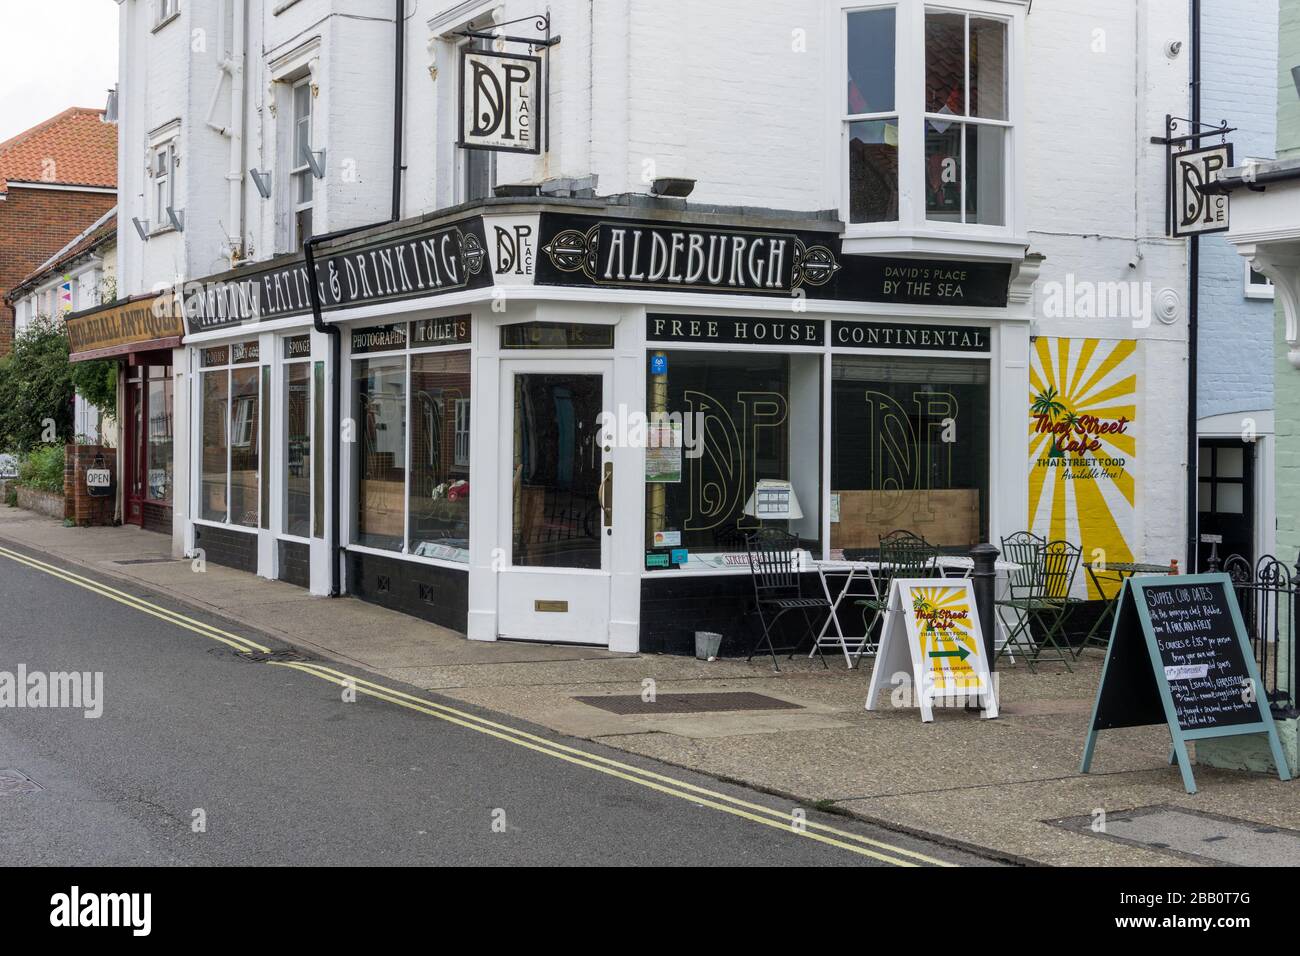 David's Place By The Sea, an Art Deco styled pub, in the seaside resort of Aldeburgh, Suffolk, UK Stock Photo